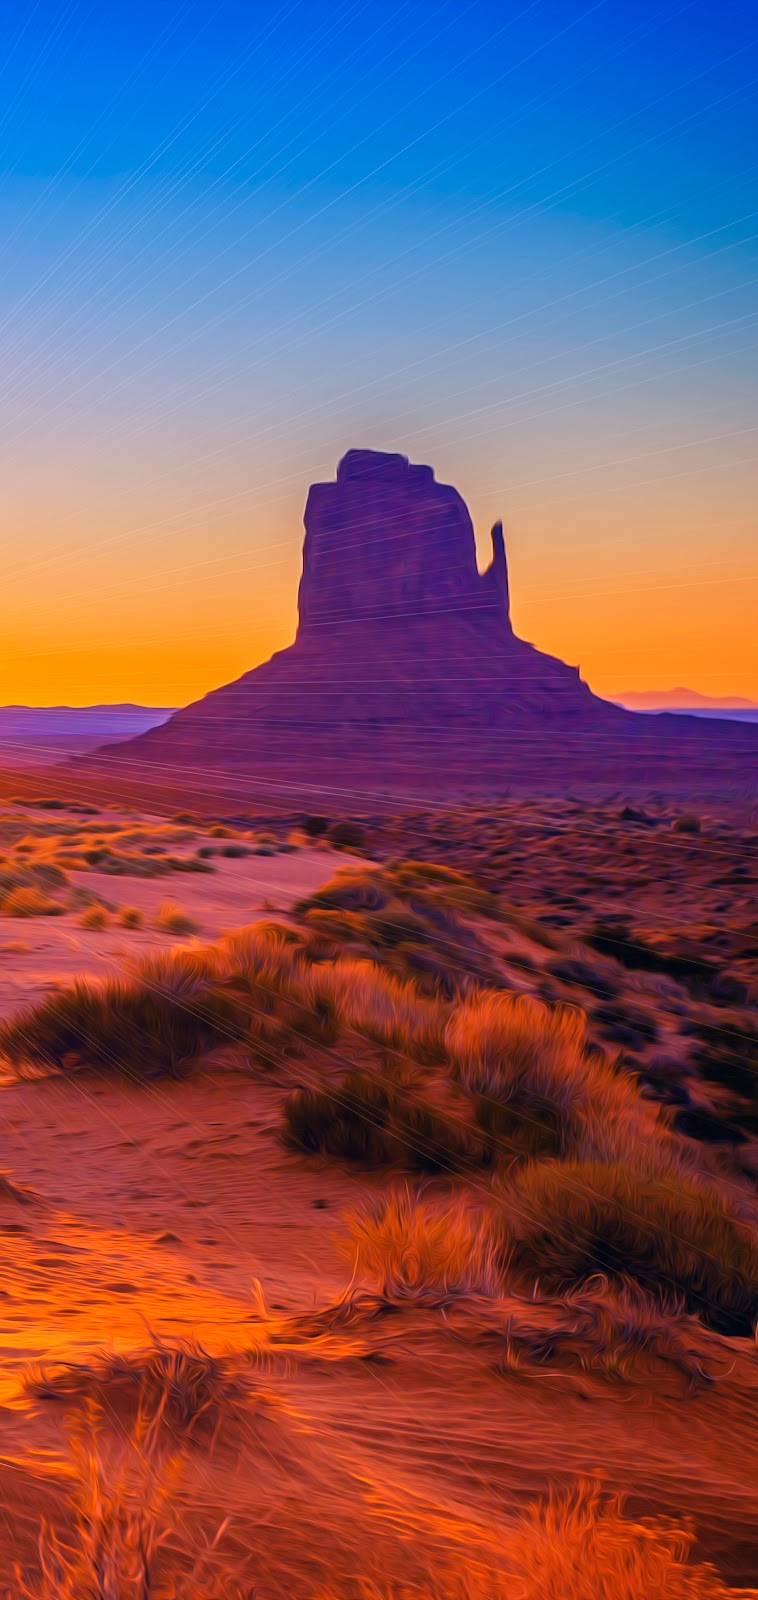 WALLPAPER IPHONE 4K - MONUMENT VALLEY 